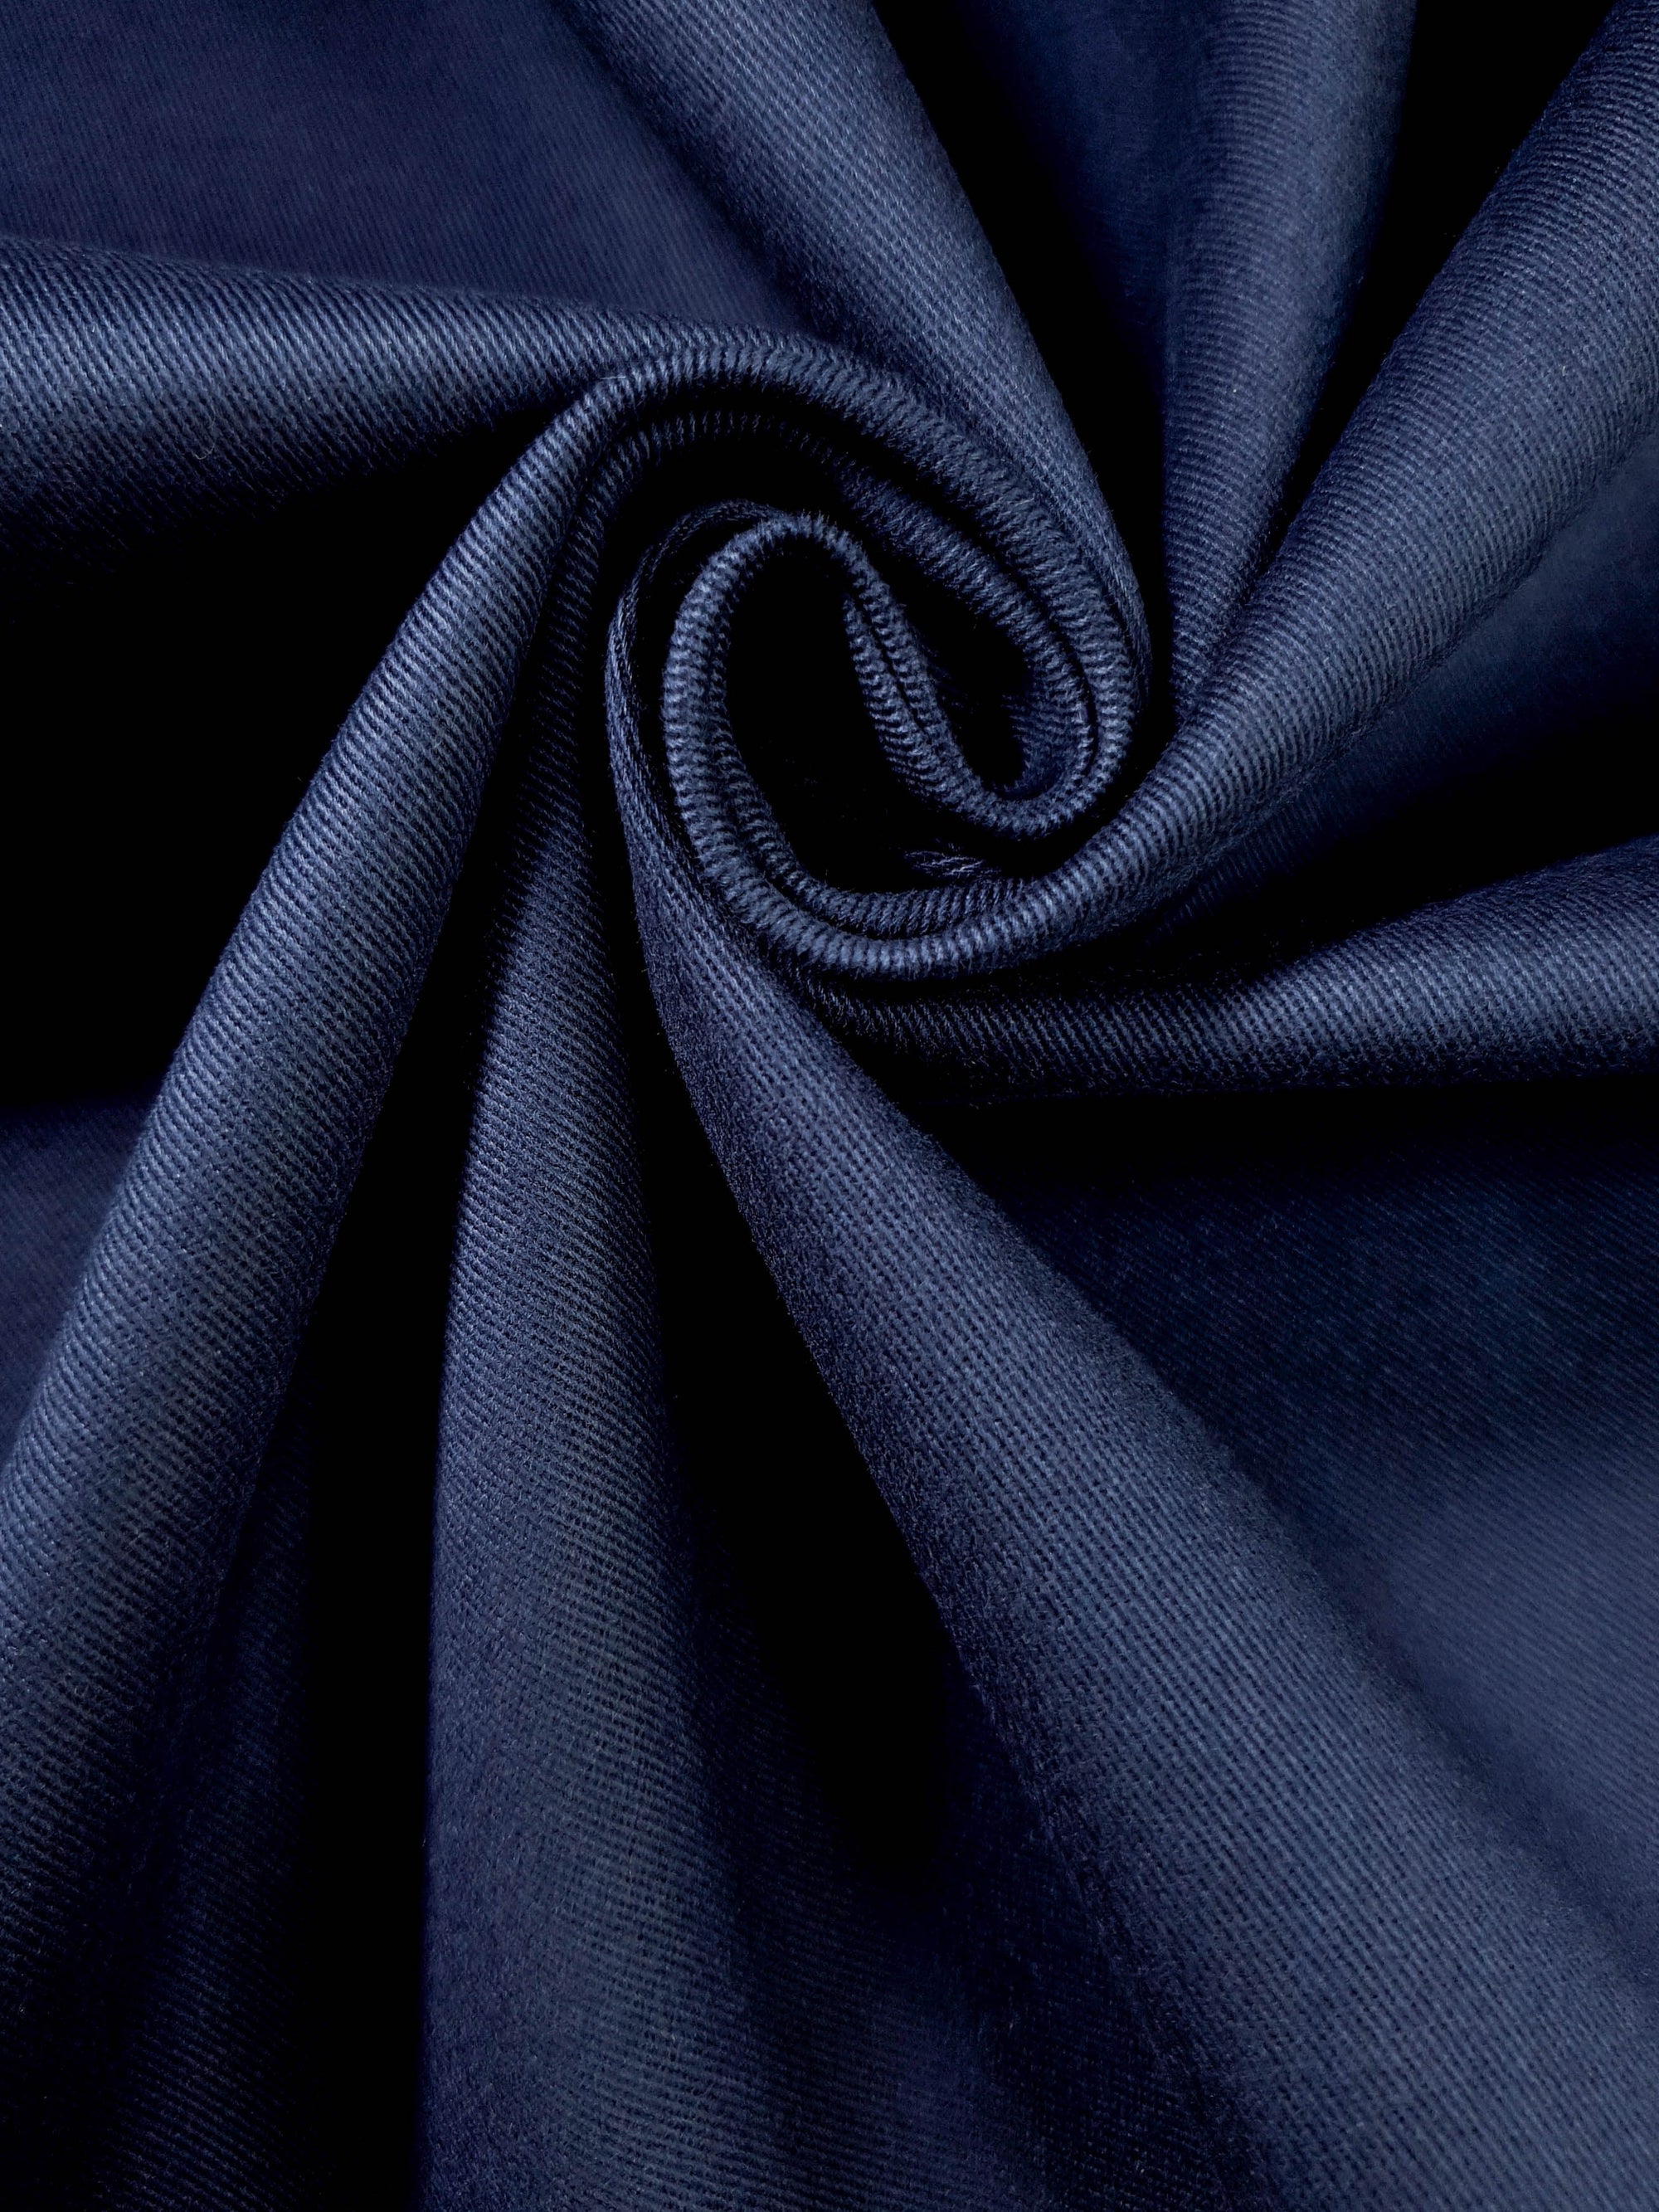 HUBERROSS Blue Color Brushed Cotton with Stretch  97% Cotton 3% Lycra Cloth Made in Italy